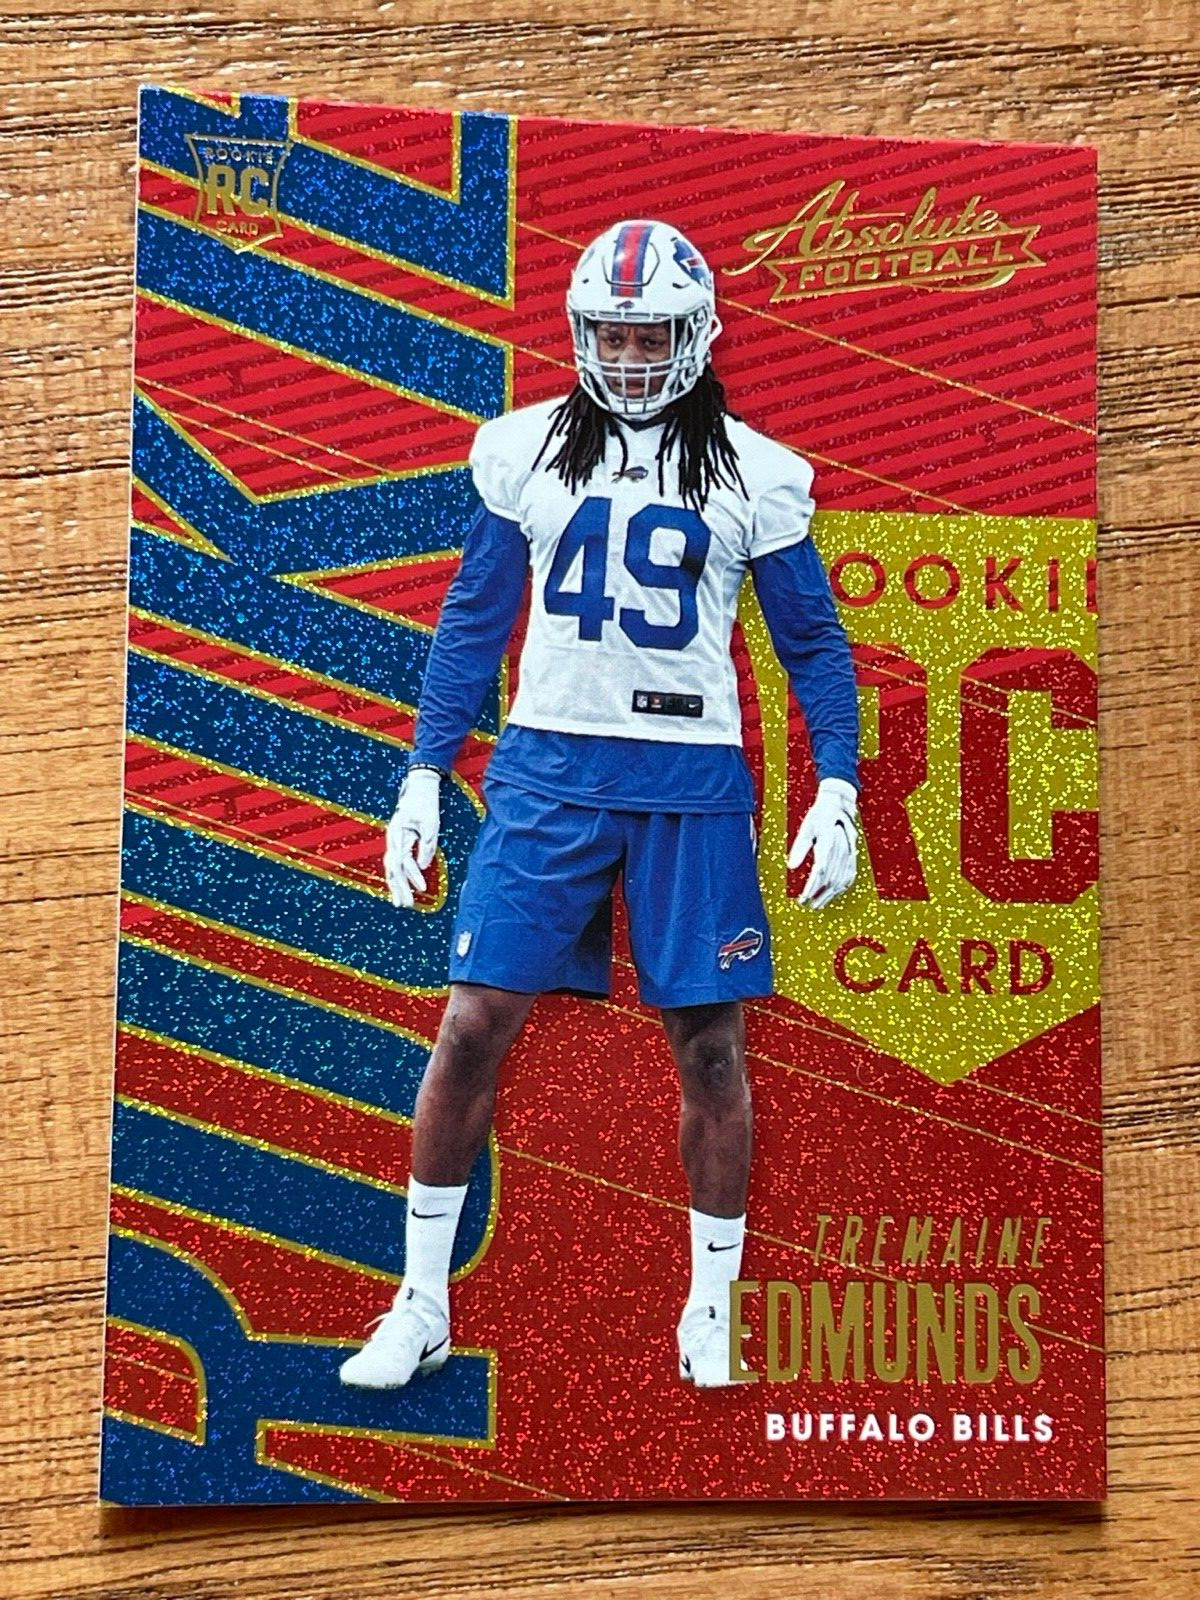 2018 PANINI ABSOLUTE FOOTBALL TREMAINE EDMUNDS SPECTRUM GOLD ROOKIE CARD No. 141. rookie card picture